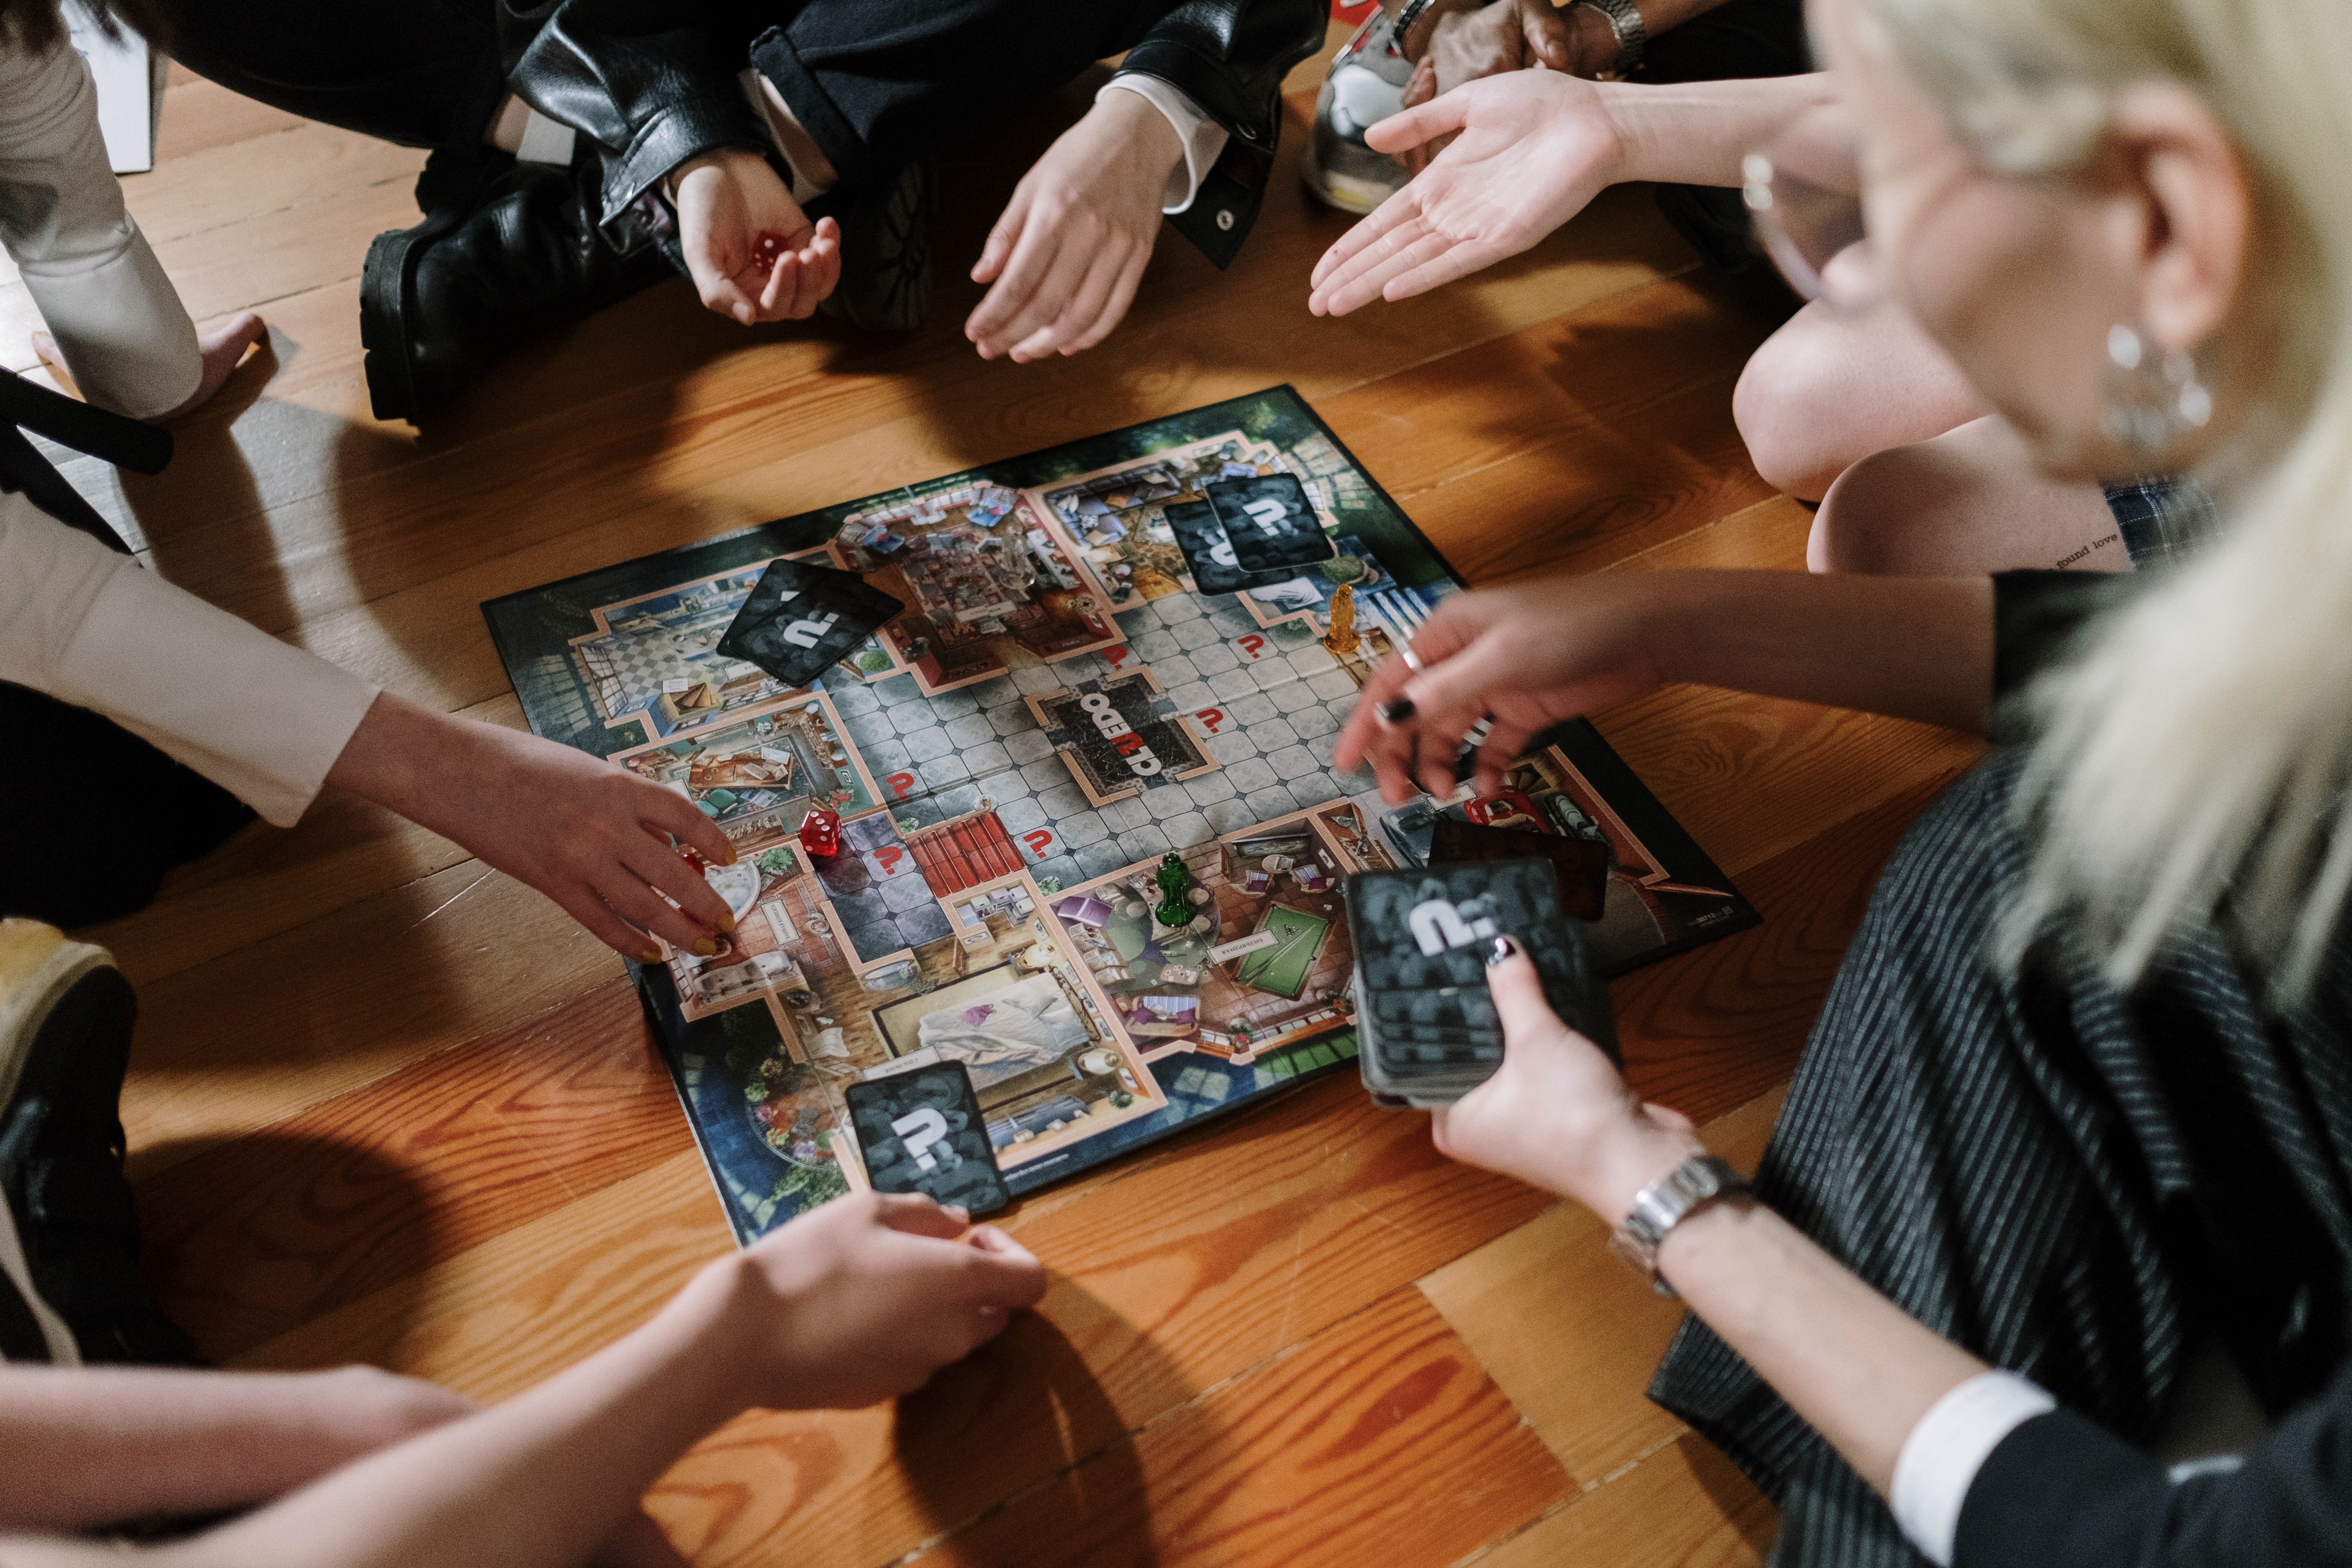 OP felt Stacy & his sister's boyfriend oddly behaved during the board game. | Source: Pexels